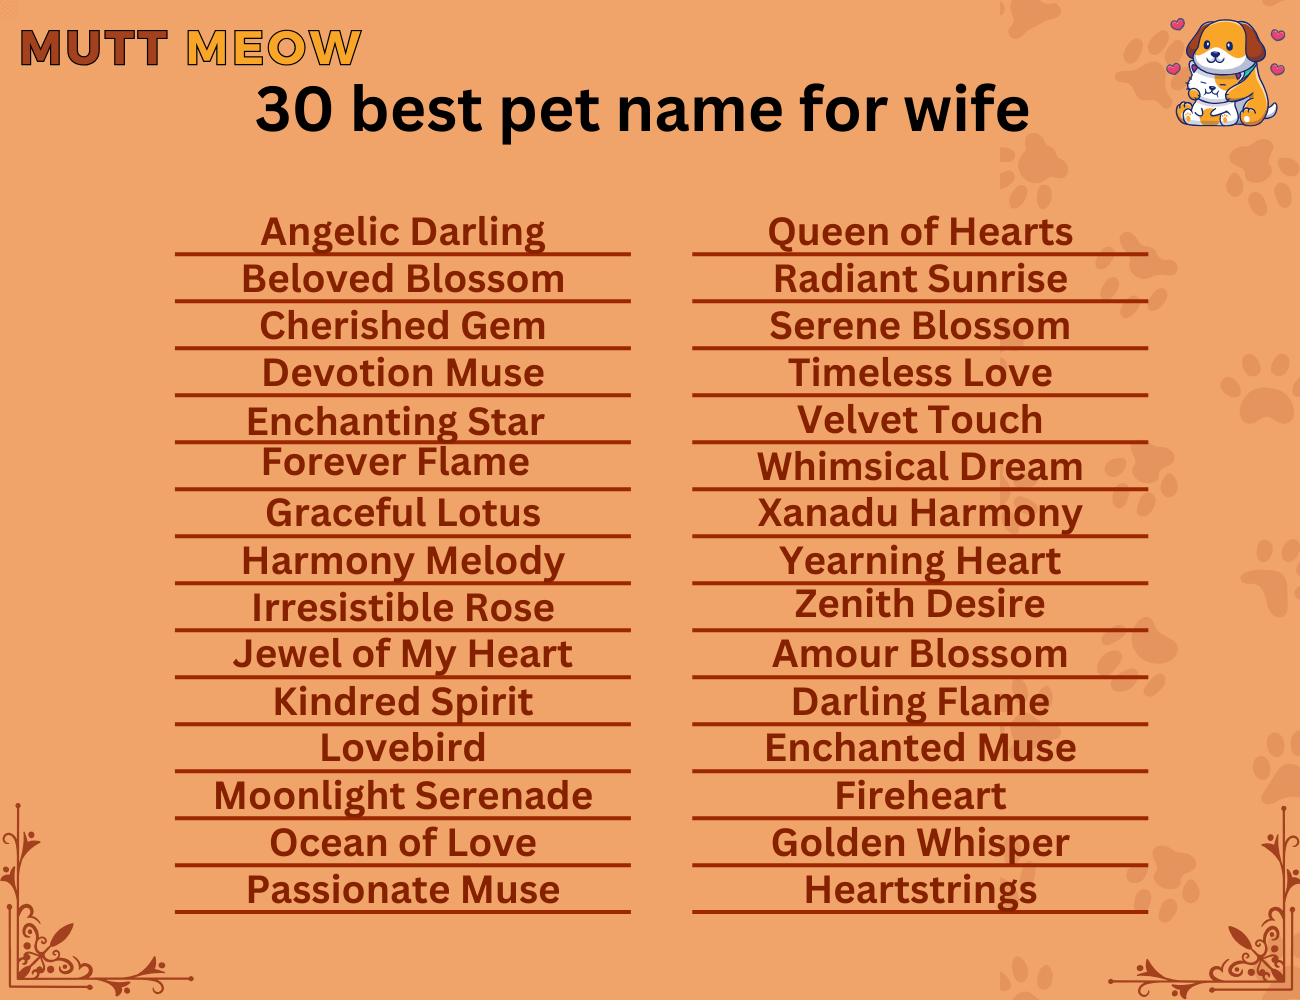 30 best pet name for wife